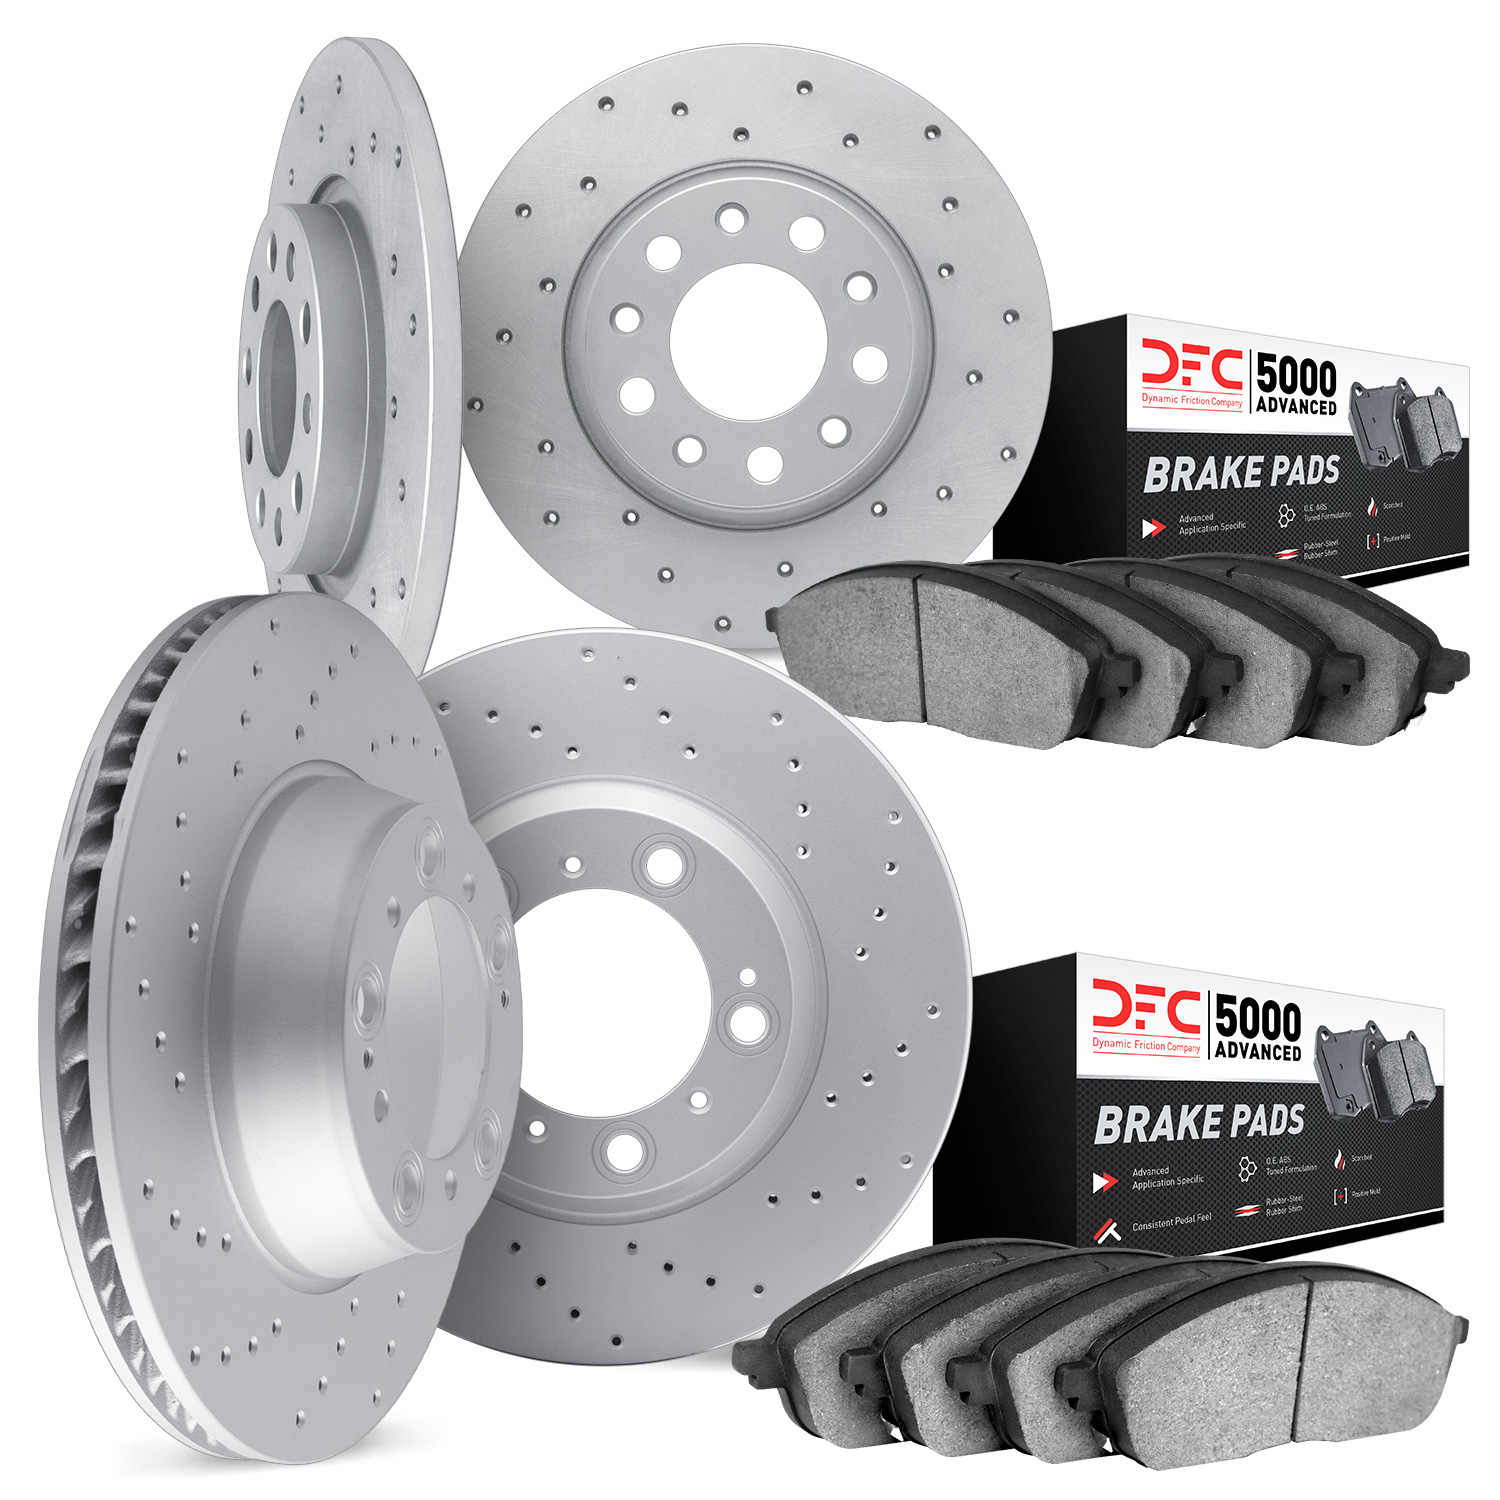 2704-13086 Geoperformance Drilled Brake Rotors with Active Performance Pads Kit, 2002-2006 Subaru, Position: Front and Rear